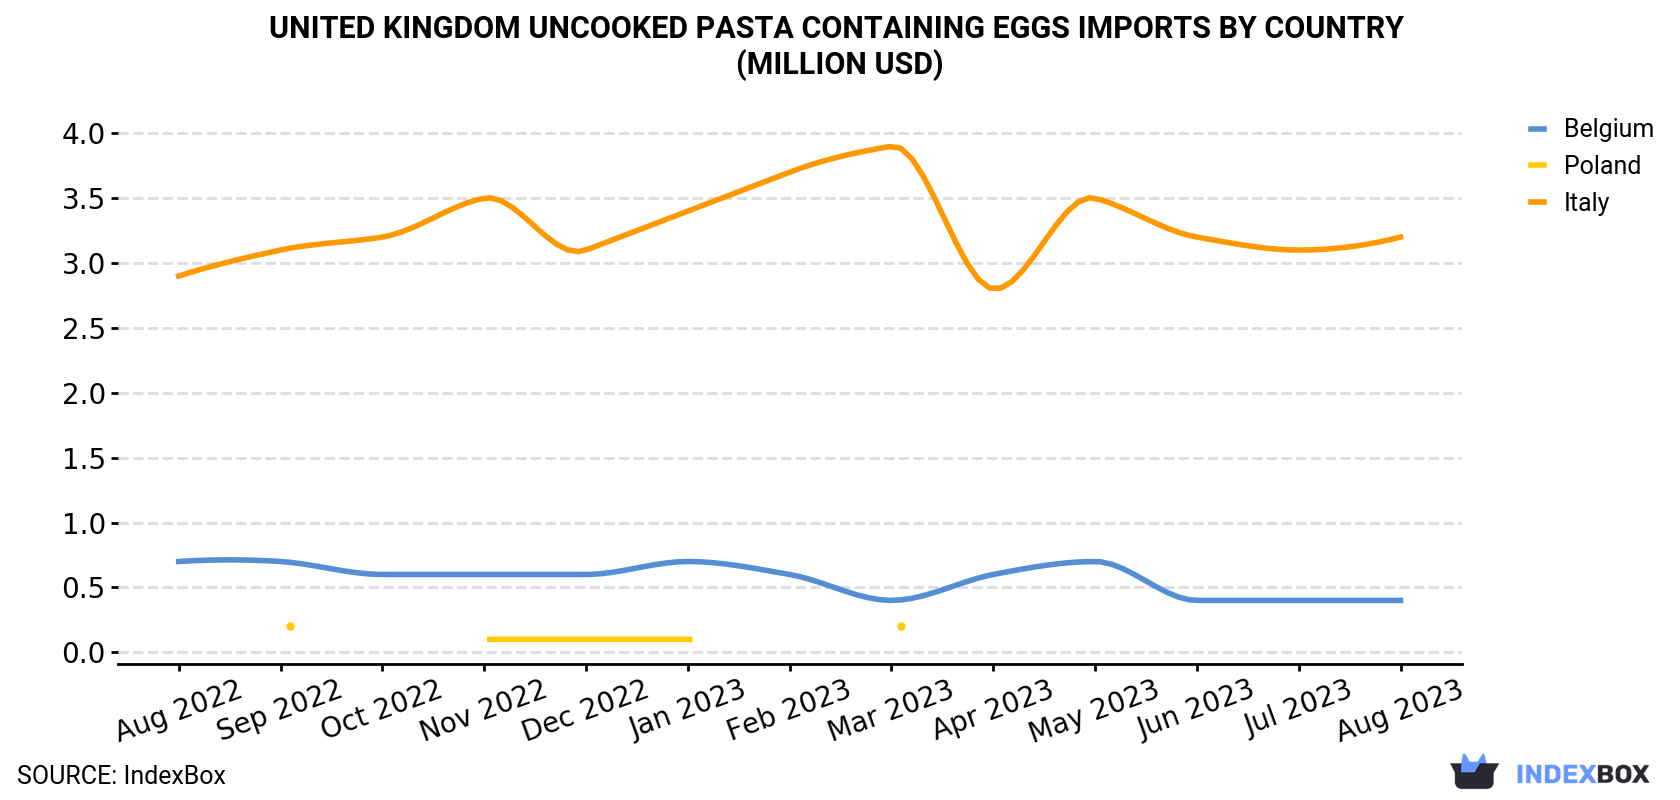 United Kingdom Uncooked Pasta Containing Eggs Imports By Country (Million USD)